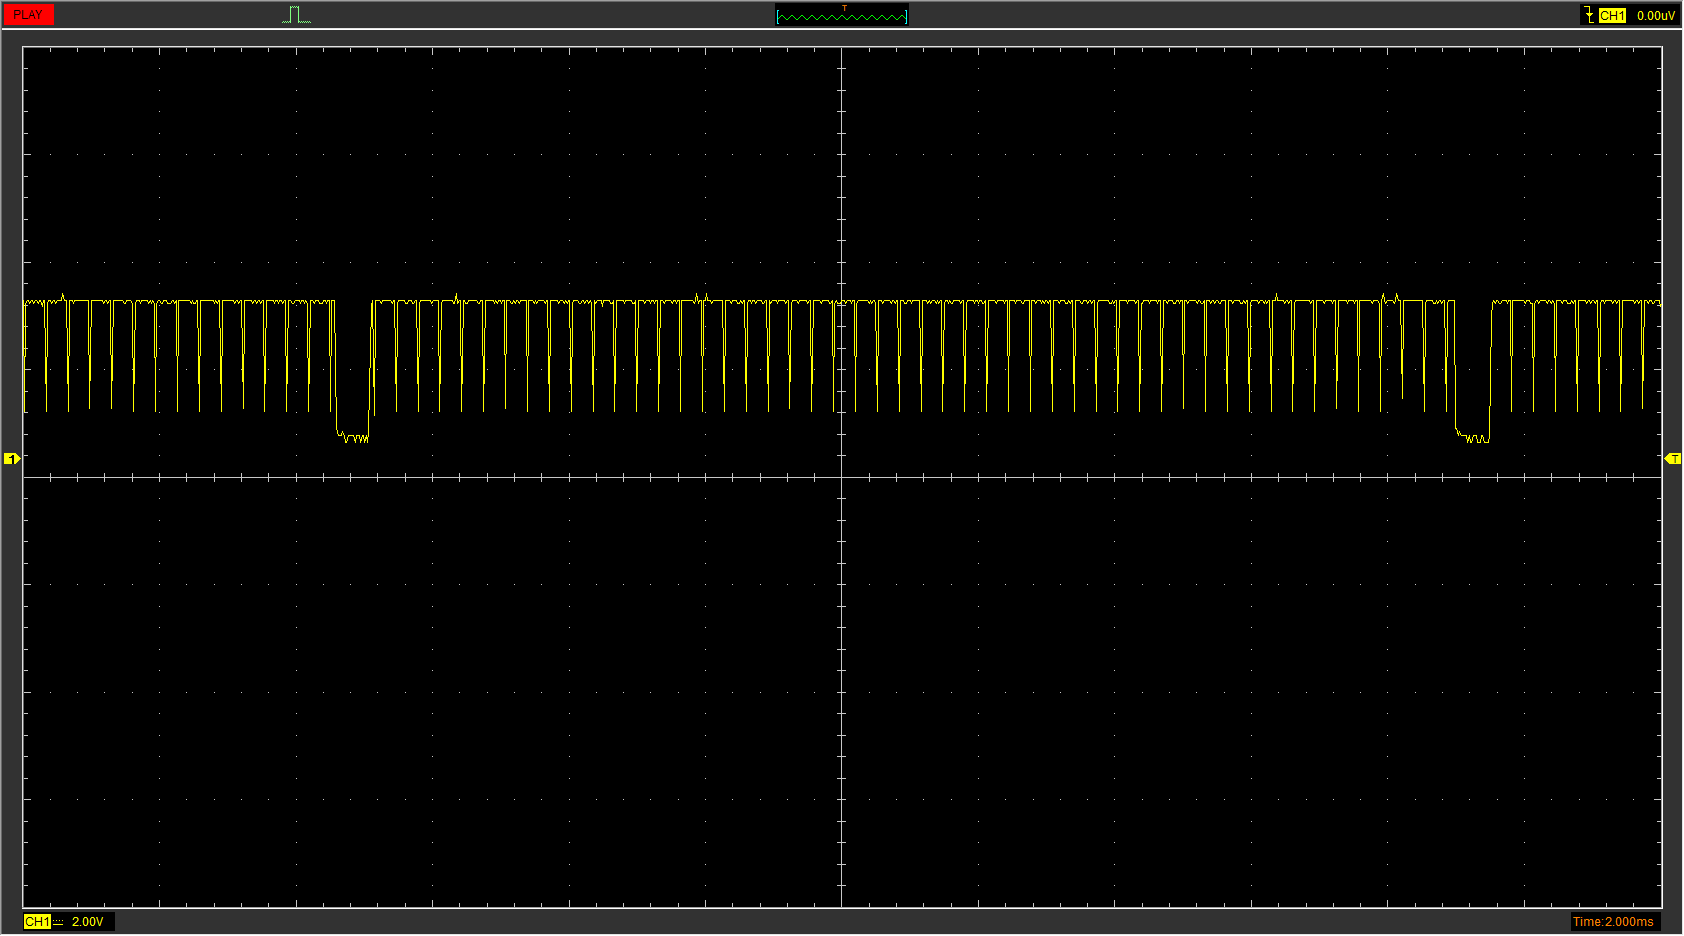 The sync signal from Dottori-kun. No pulses are seen in the vertical blank